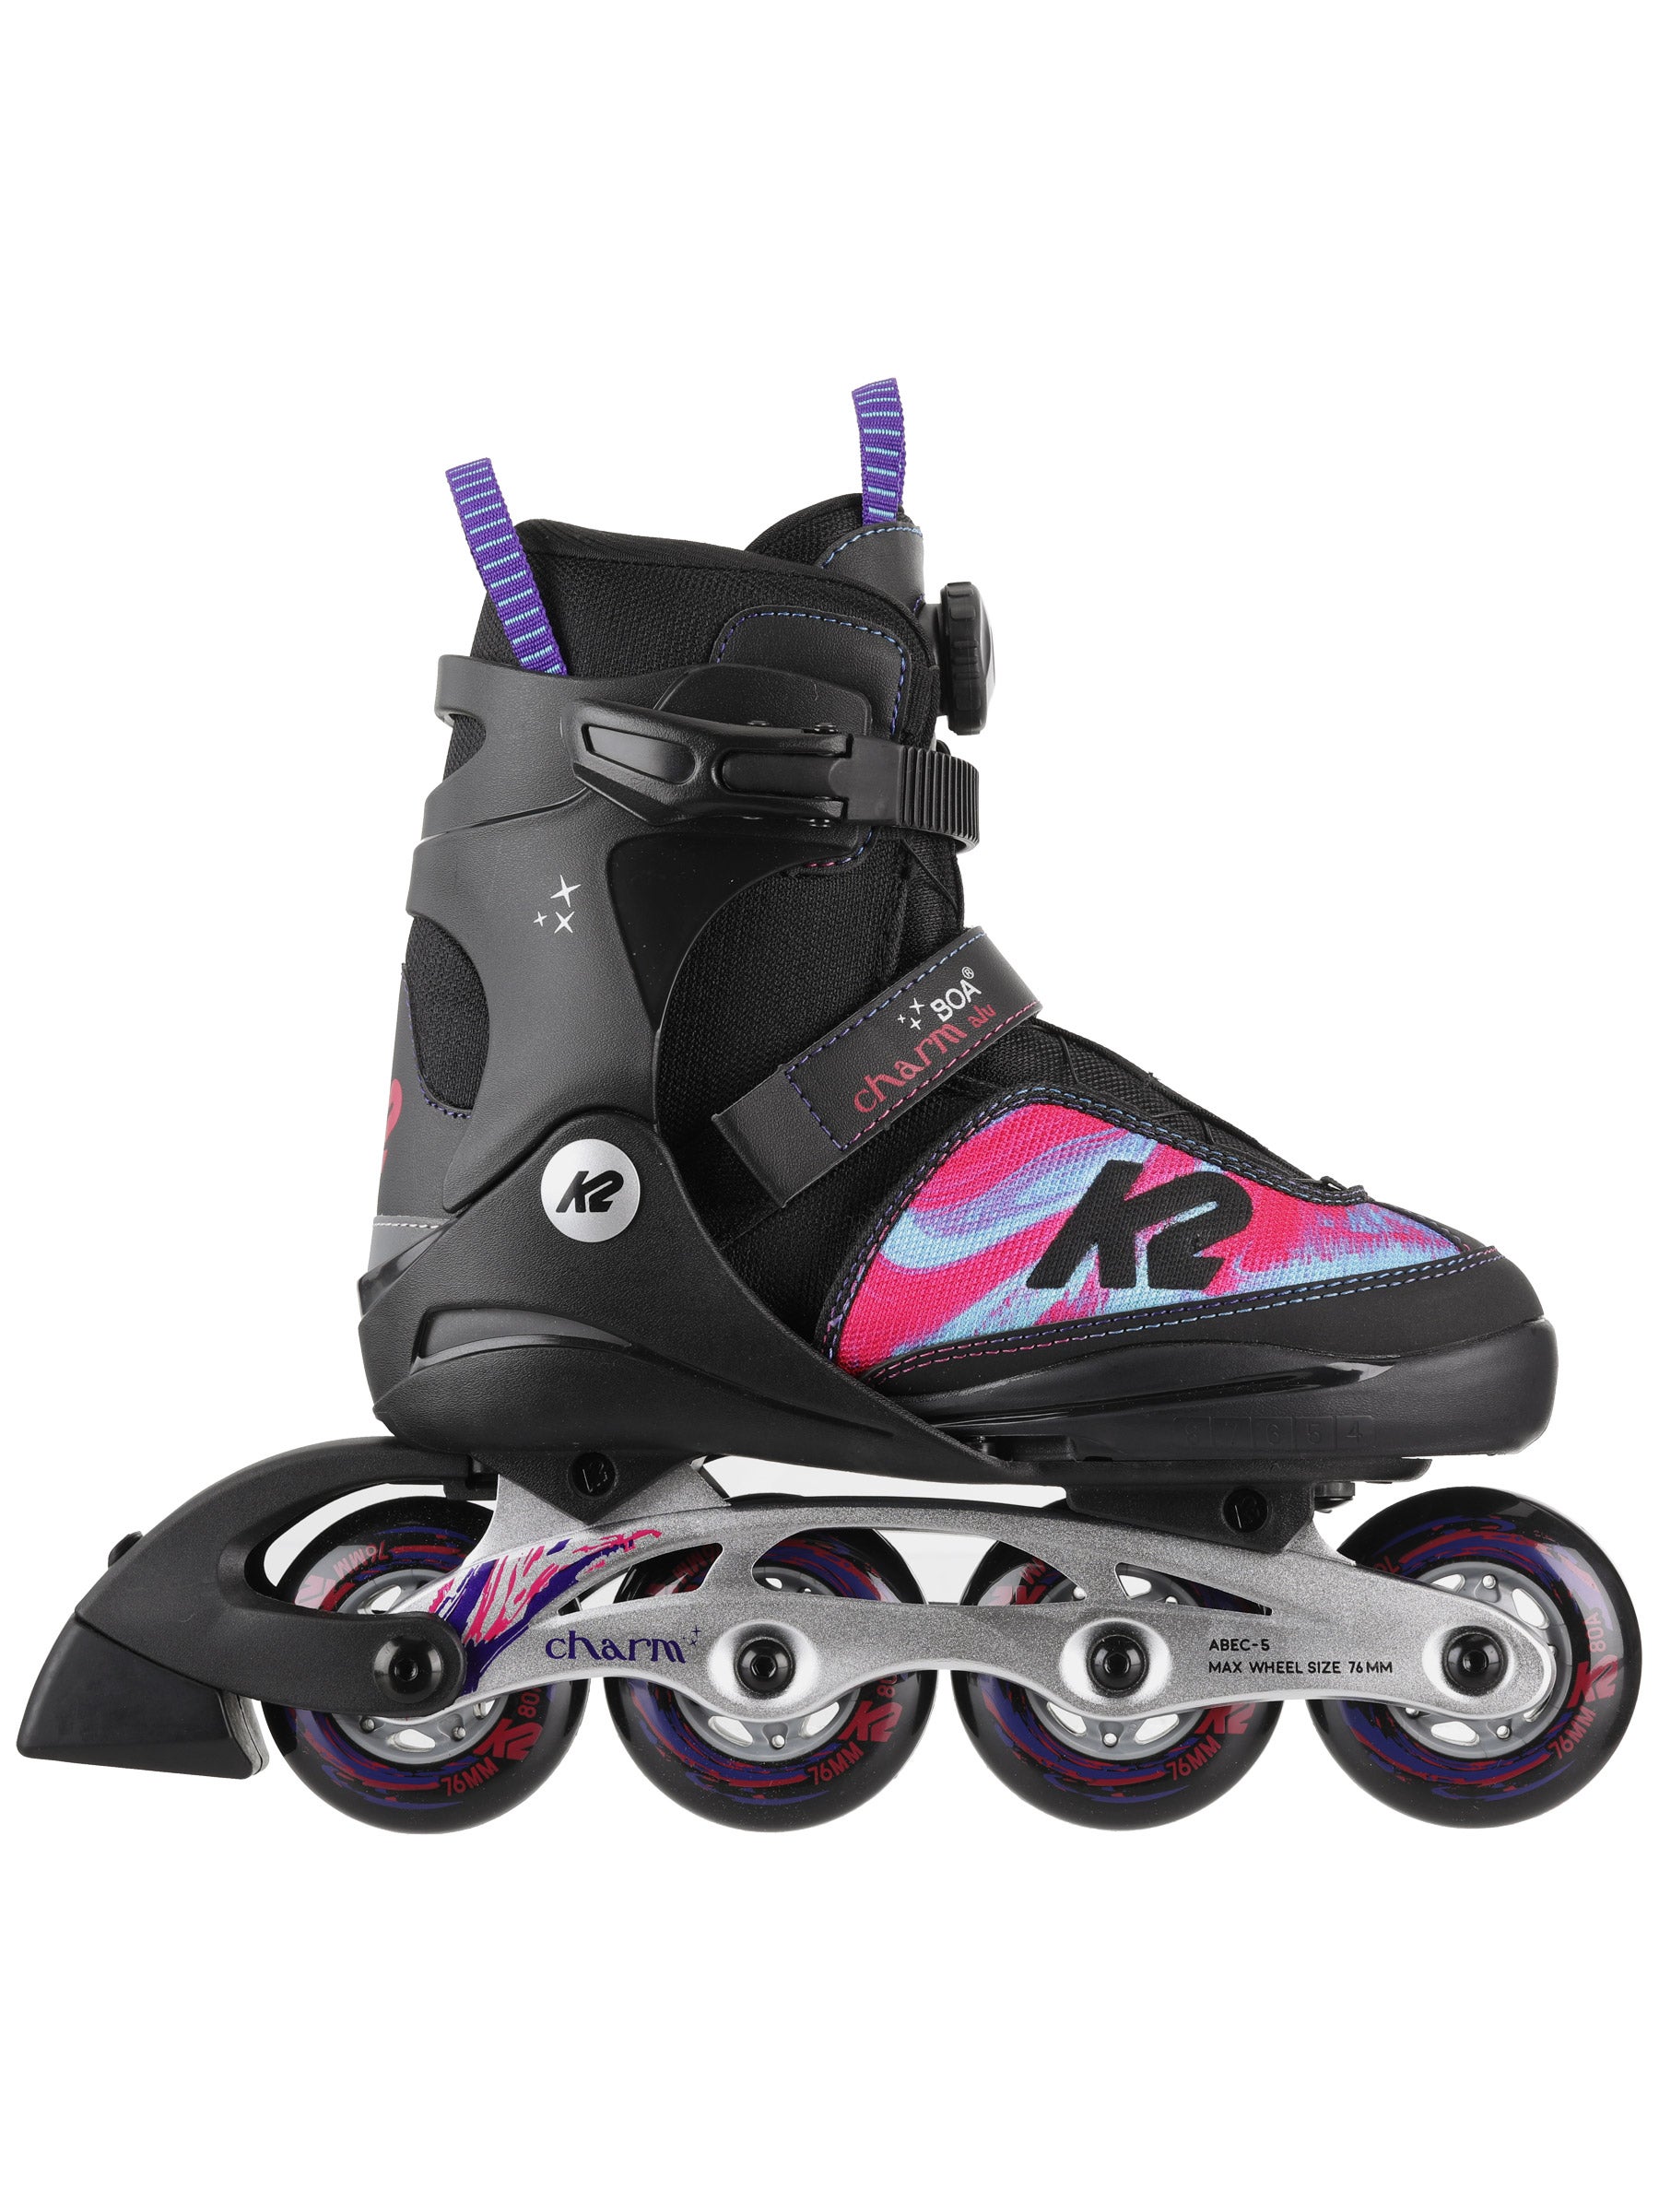 PACKGOUT Girls Adjustable Rollerblades for Kids Girls Illuminating Size S 31-34 